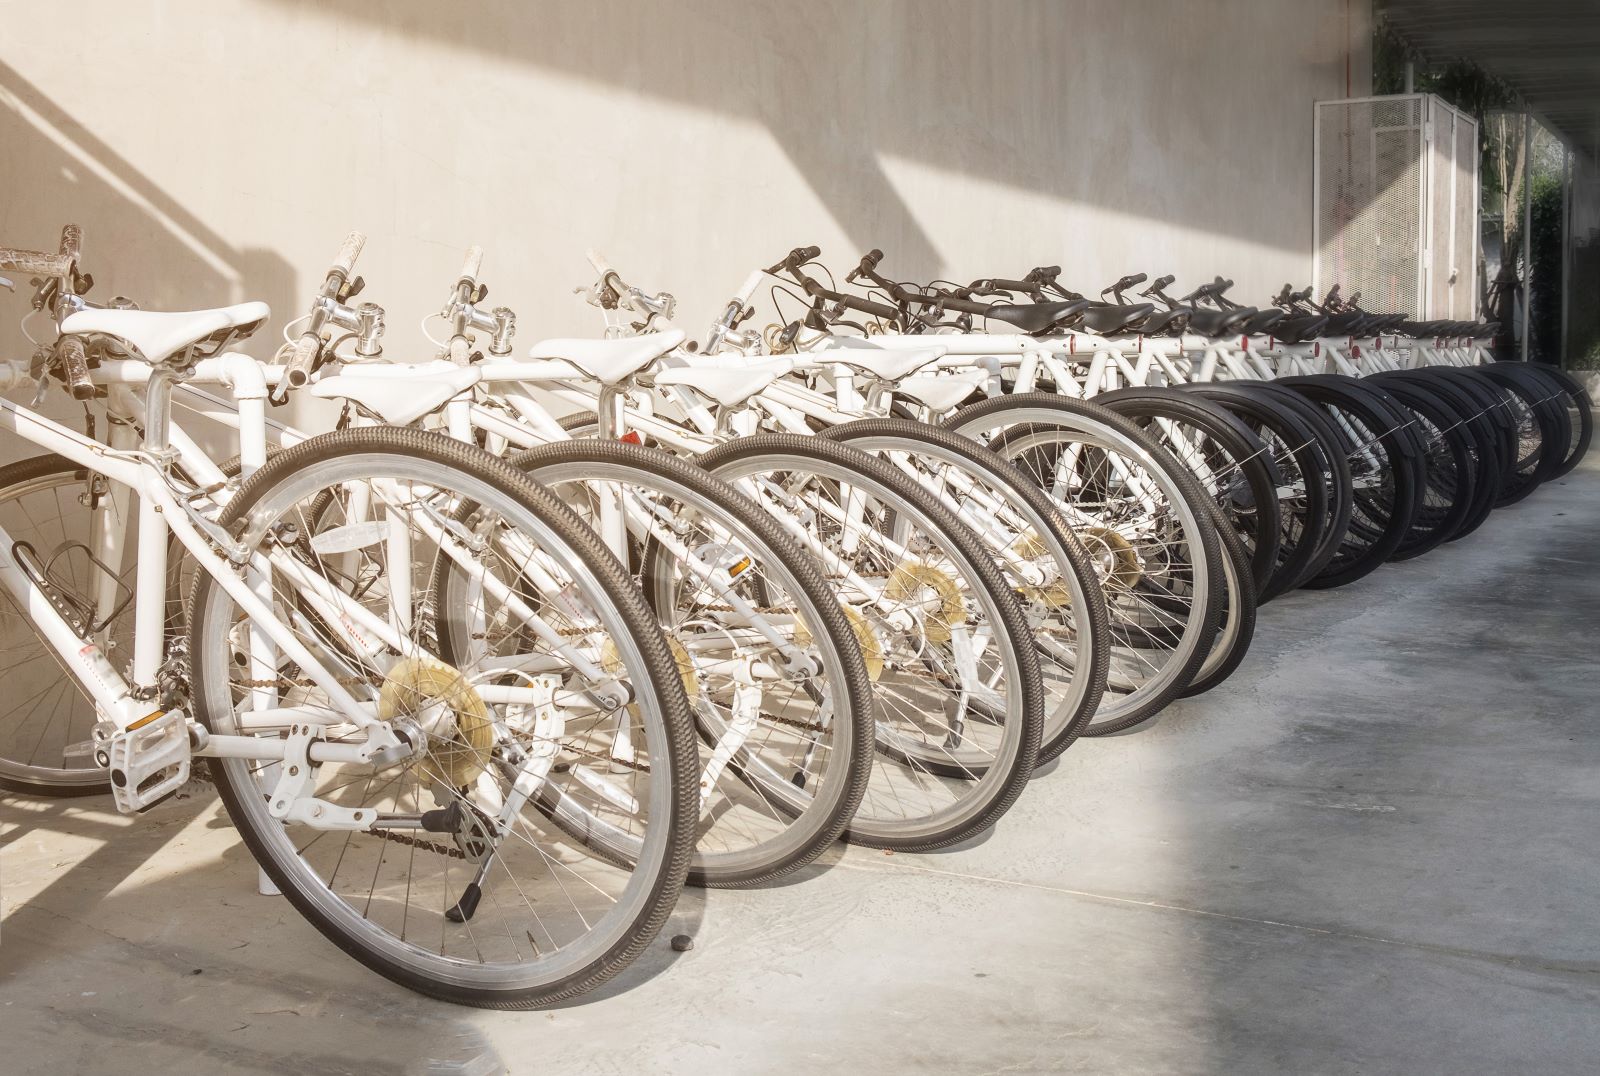 The network of Central London cycle hubs located in Q-Park parking facilities has recently broken new records, with 60,975 accesses via Spokesafe’s system taking place across the network.